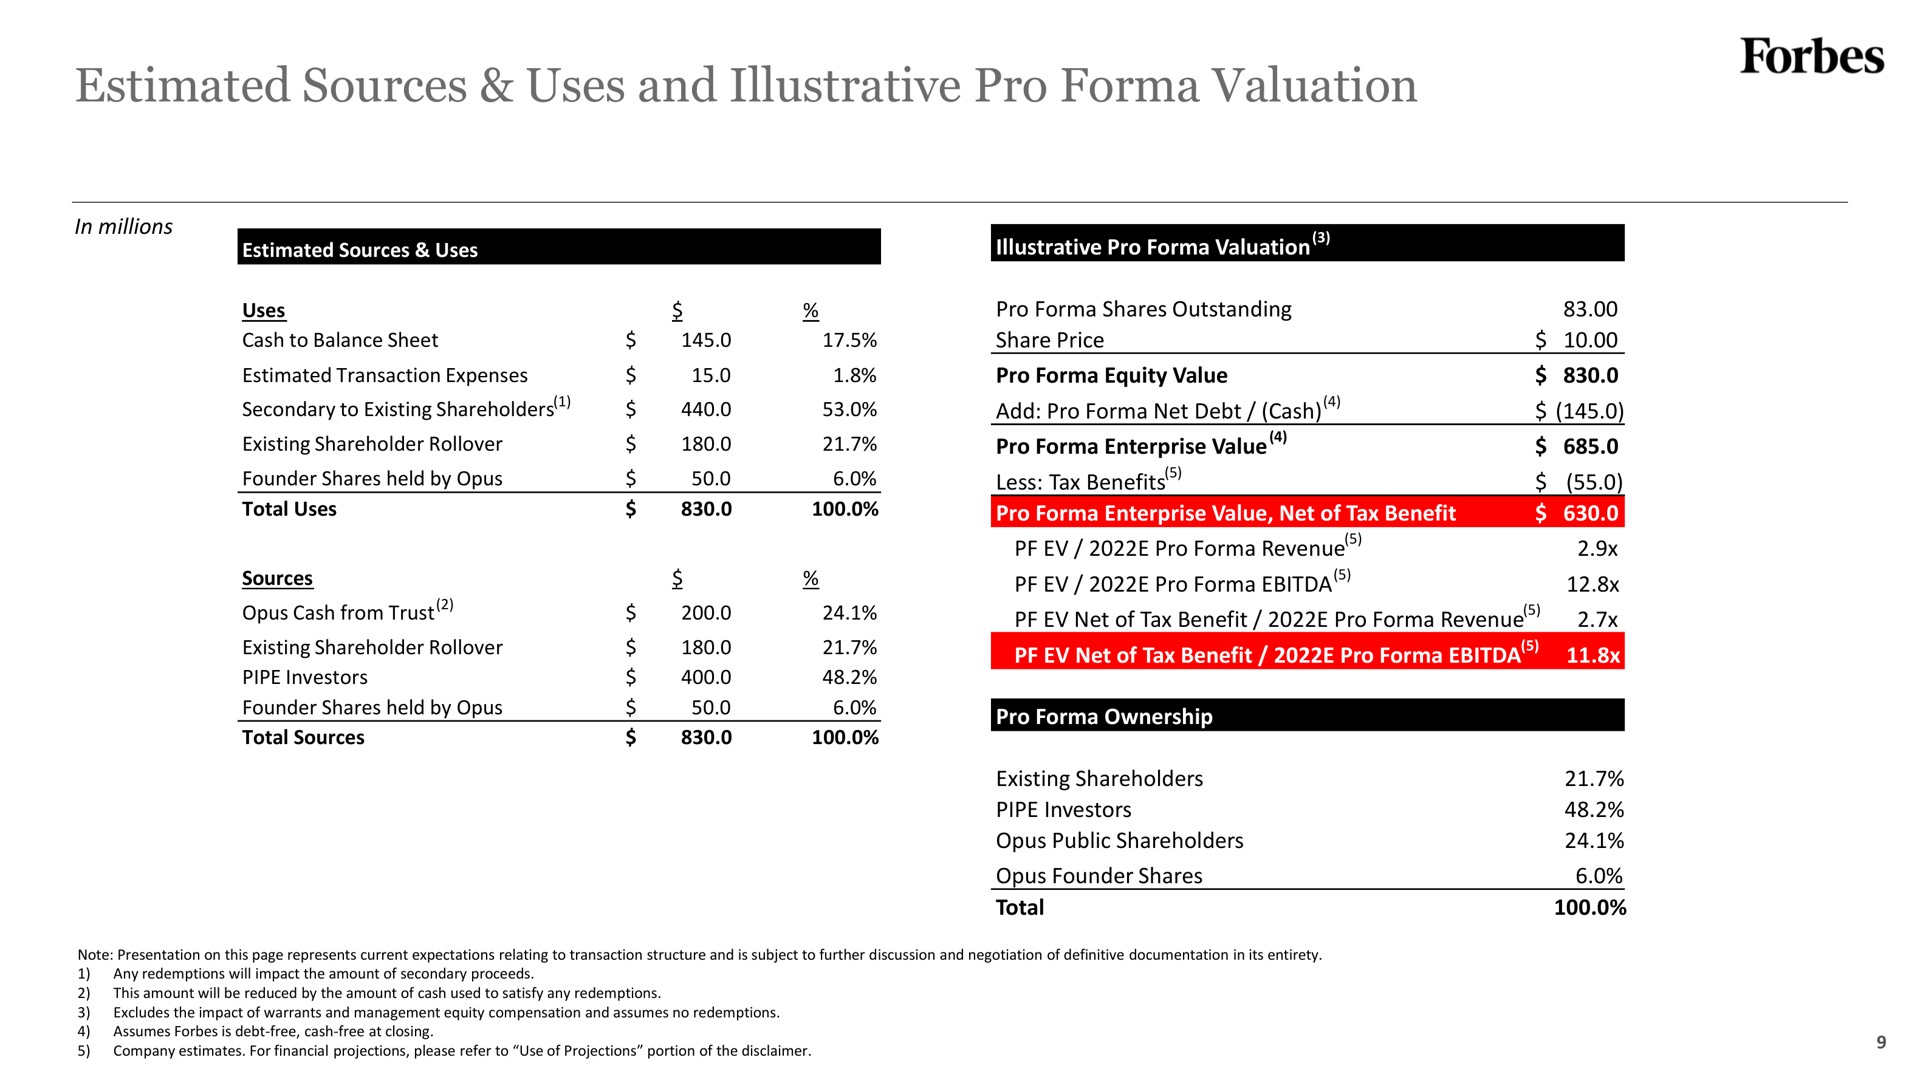 estimated sources uses and illustrative pro valuation | Forbes